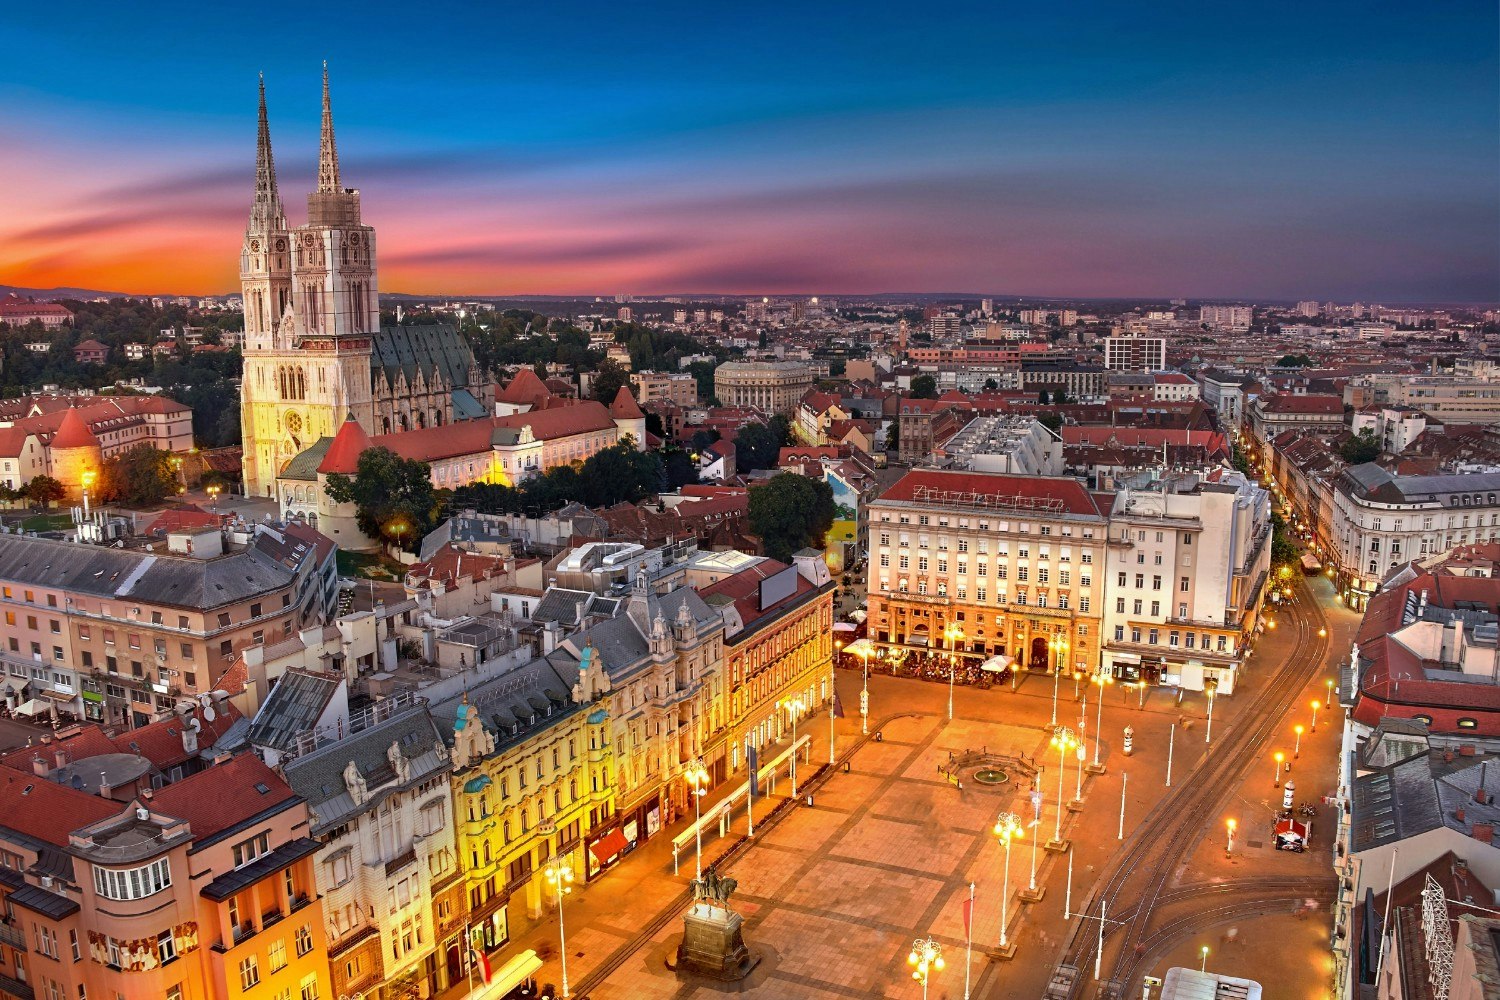 Zagreb Croatia at Sunset. Aerial View from above of Ban Jelacic Square.